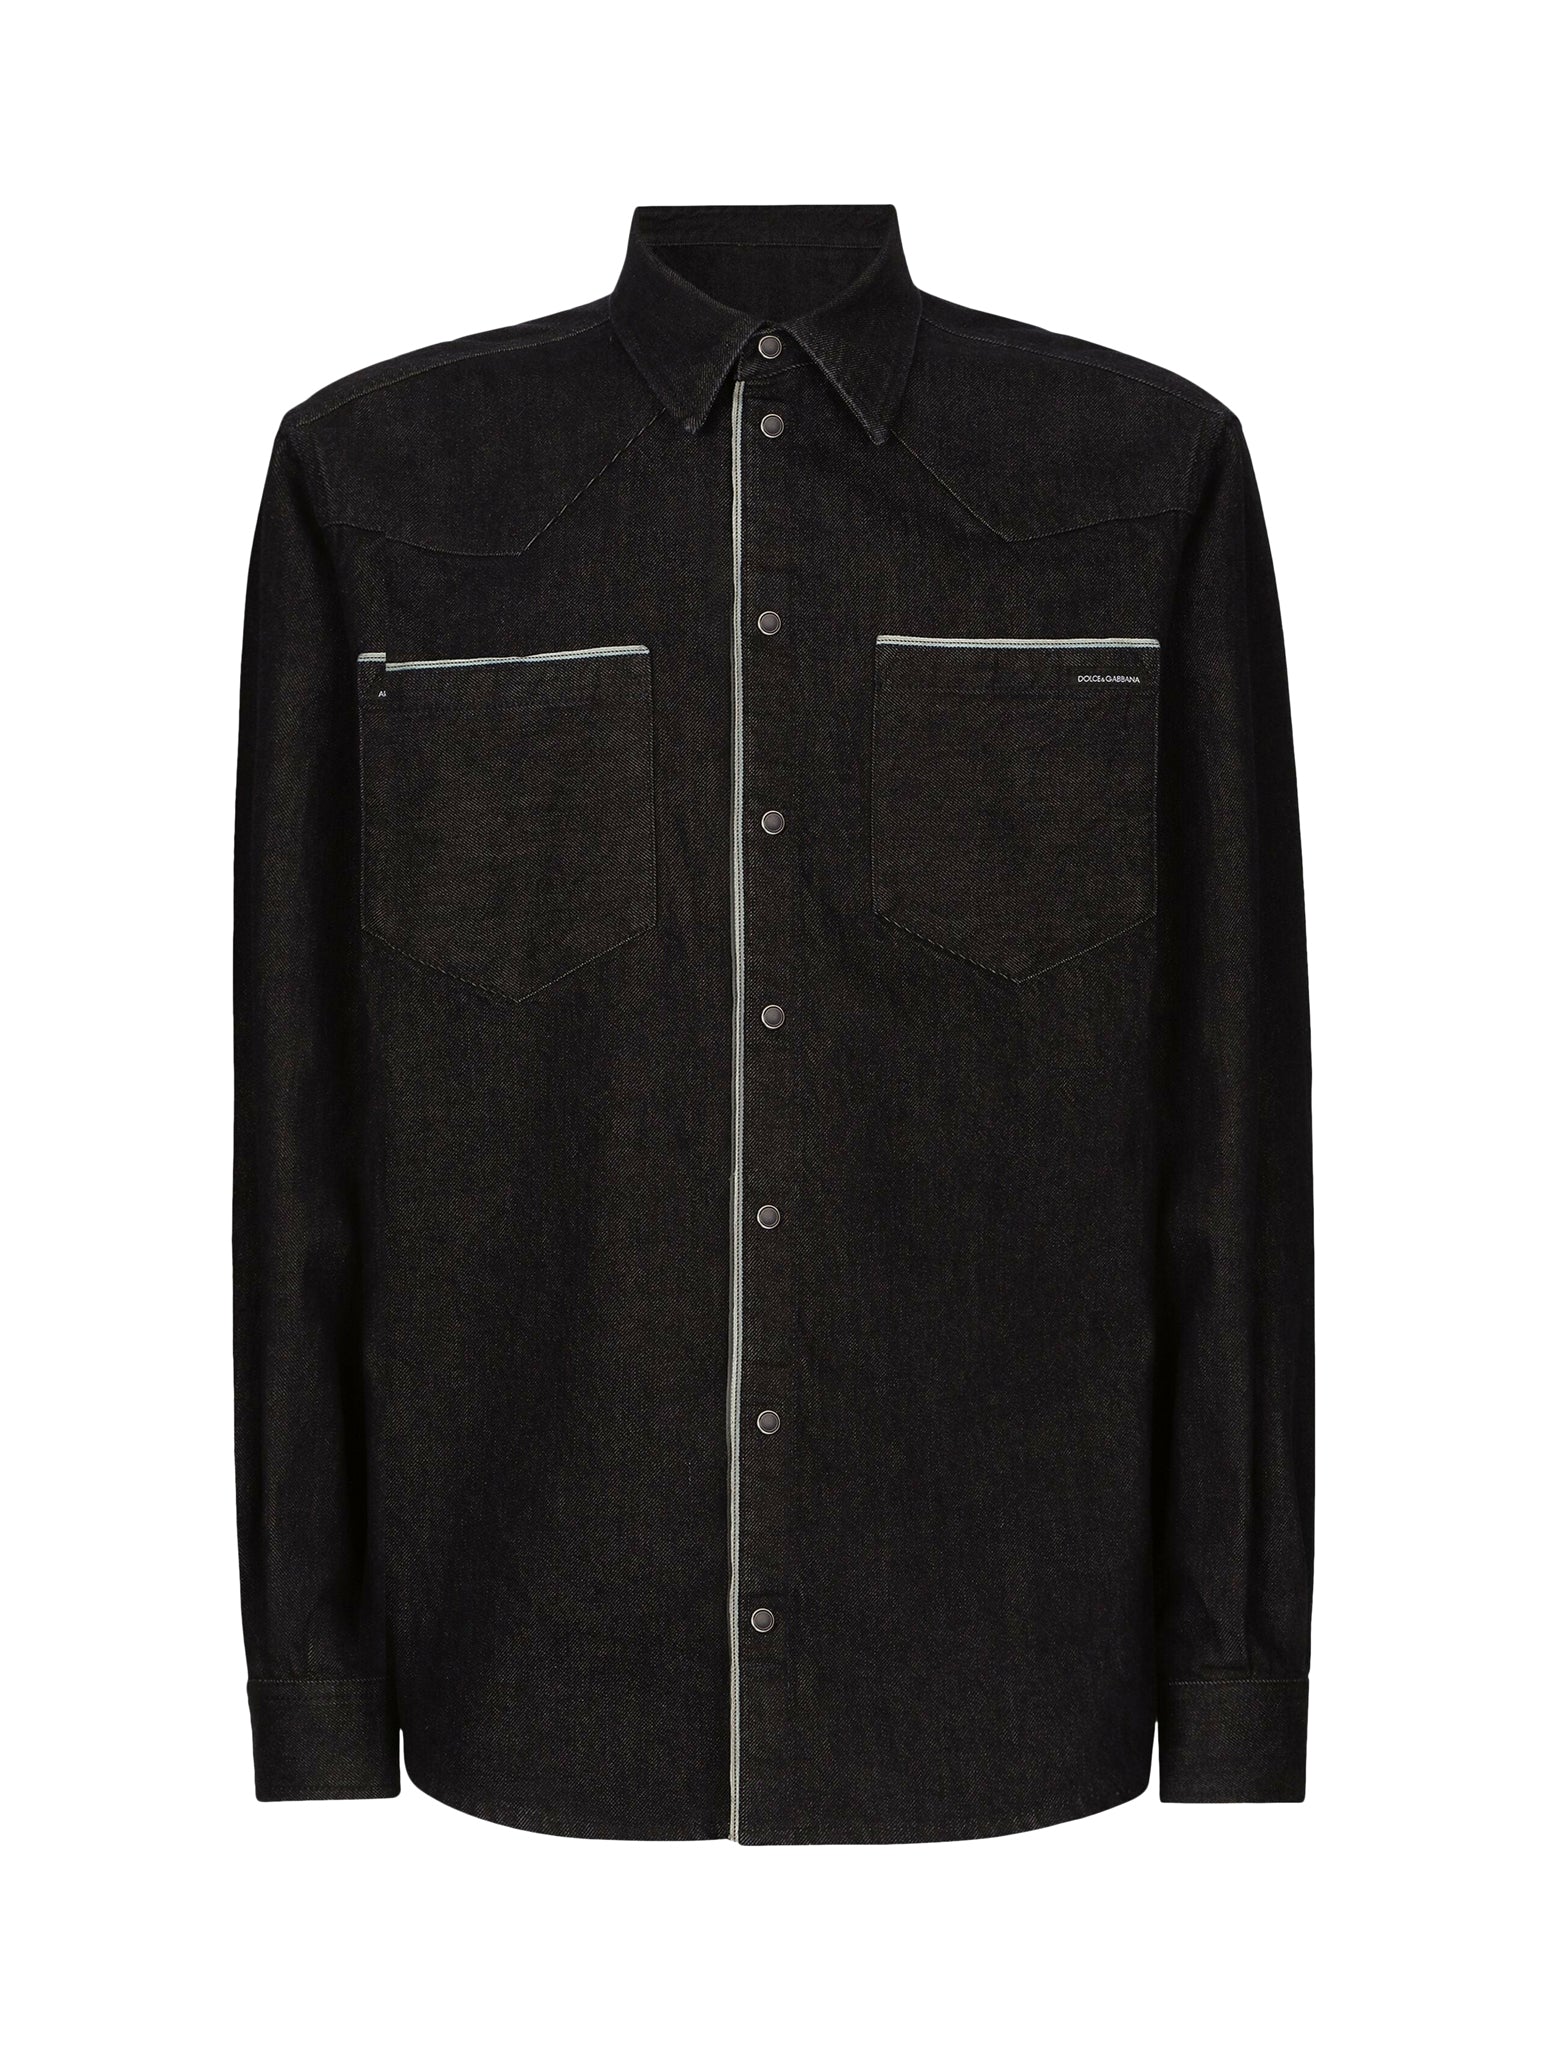 denim shirt with contrasting finishes